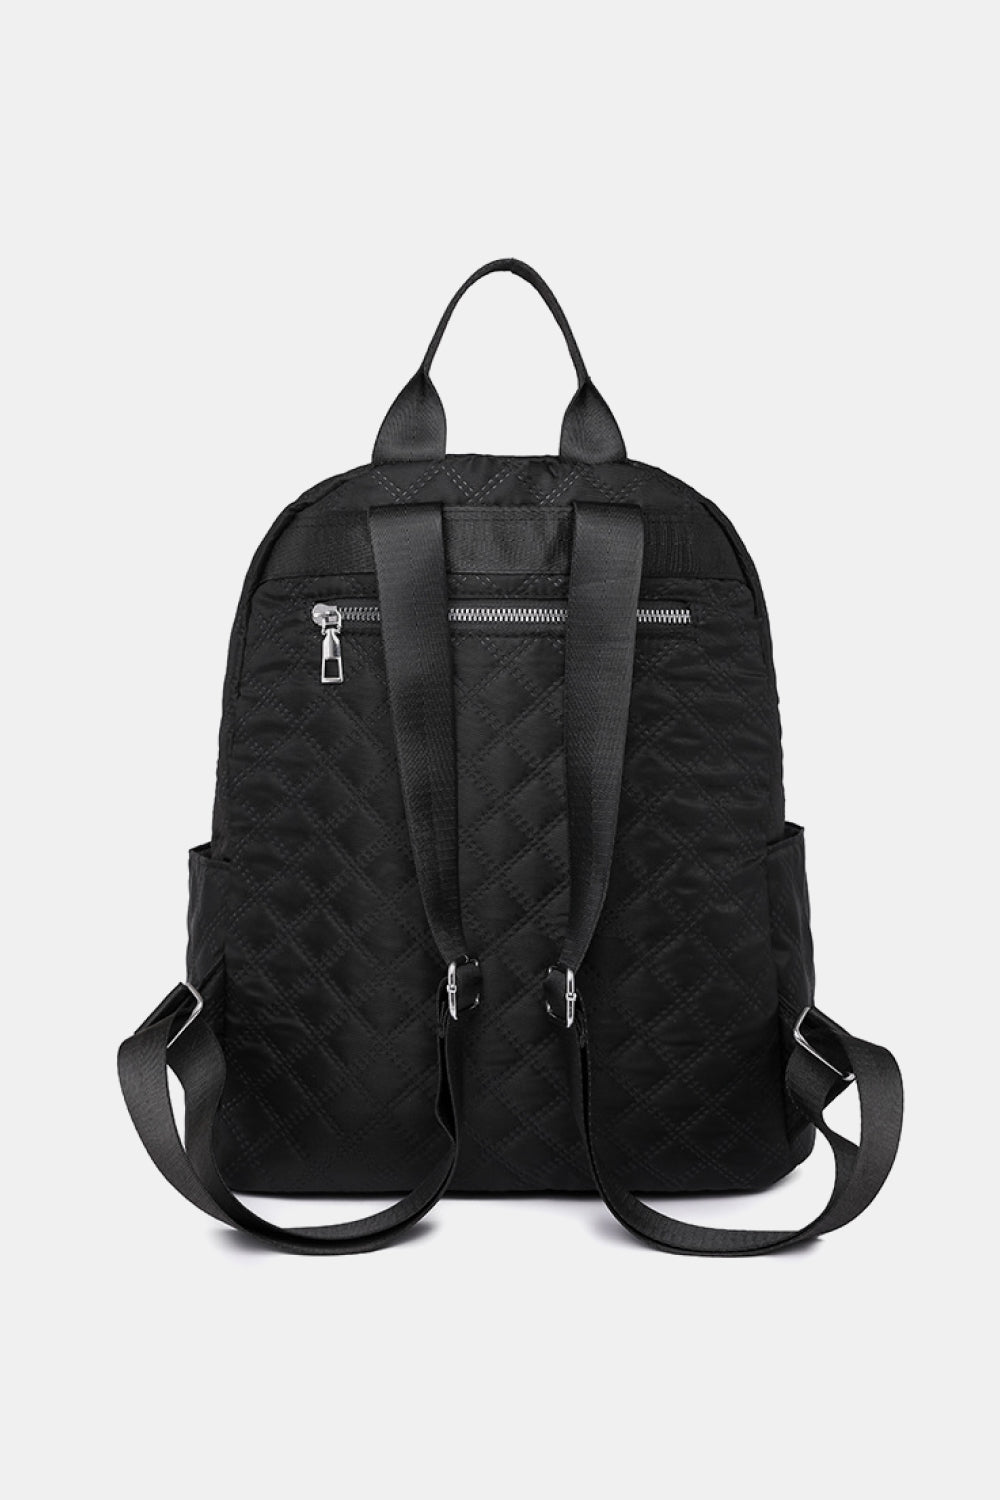 Medium Backpack available in Pink & Black, multi-pockets